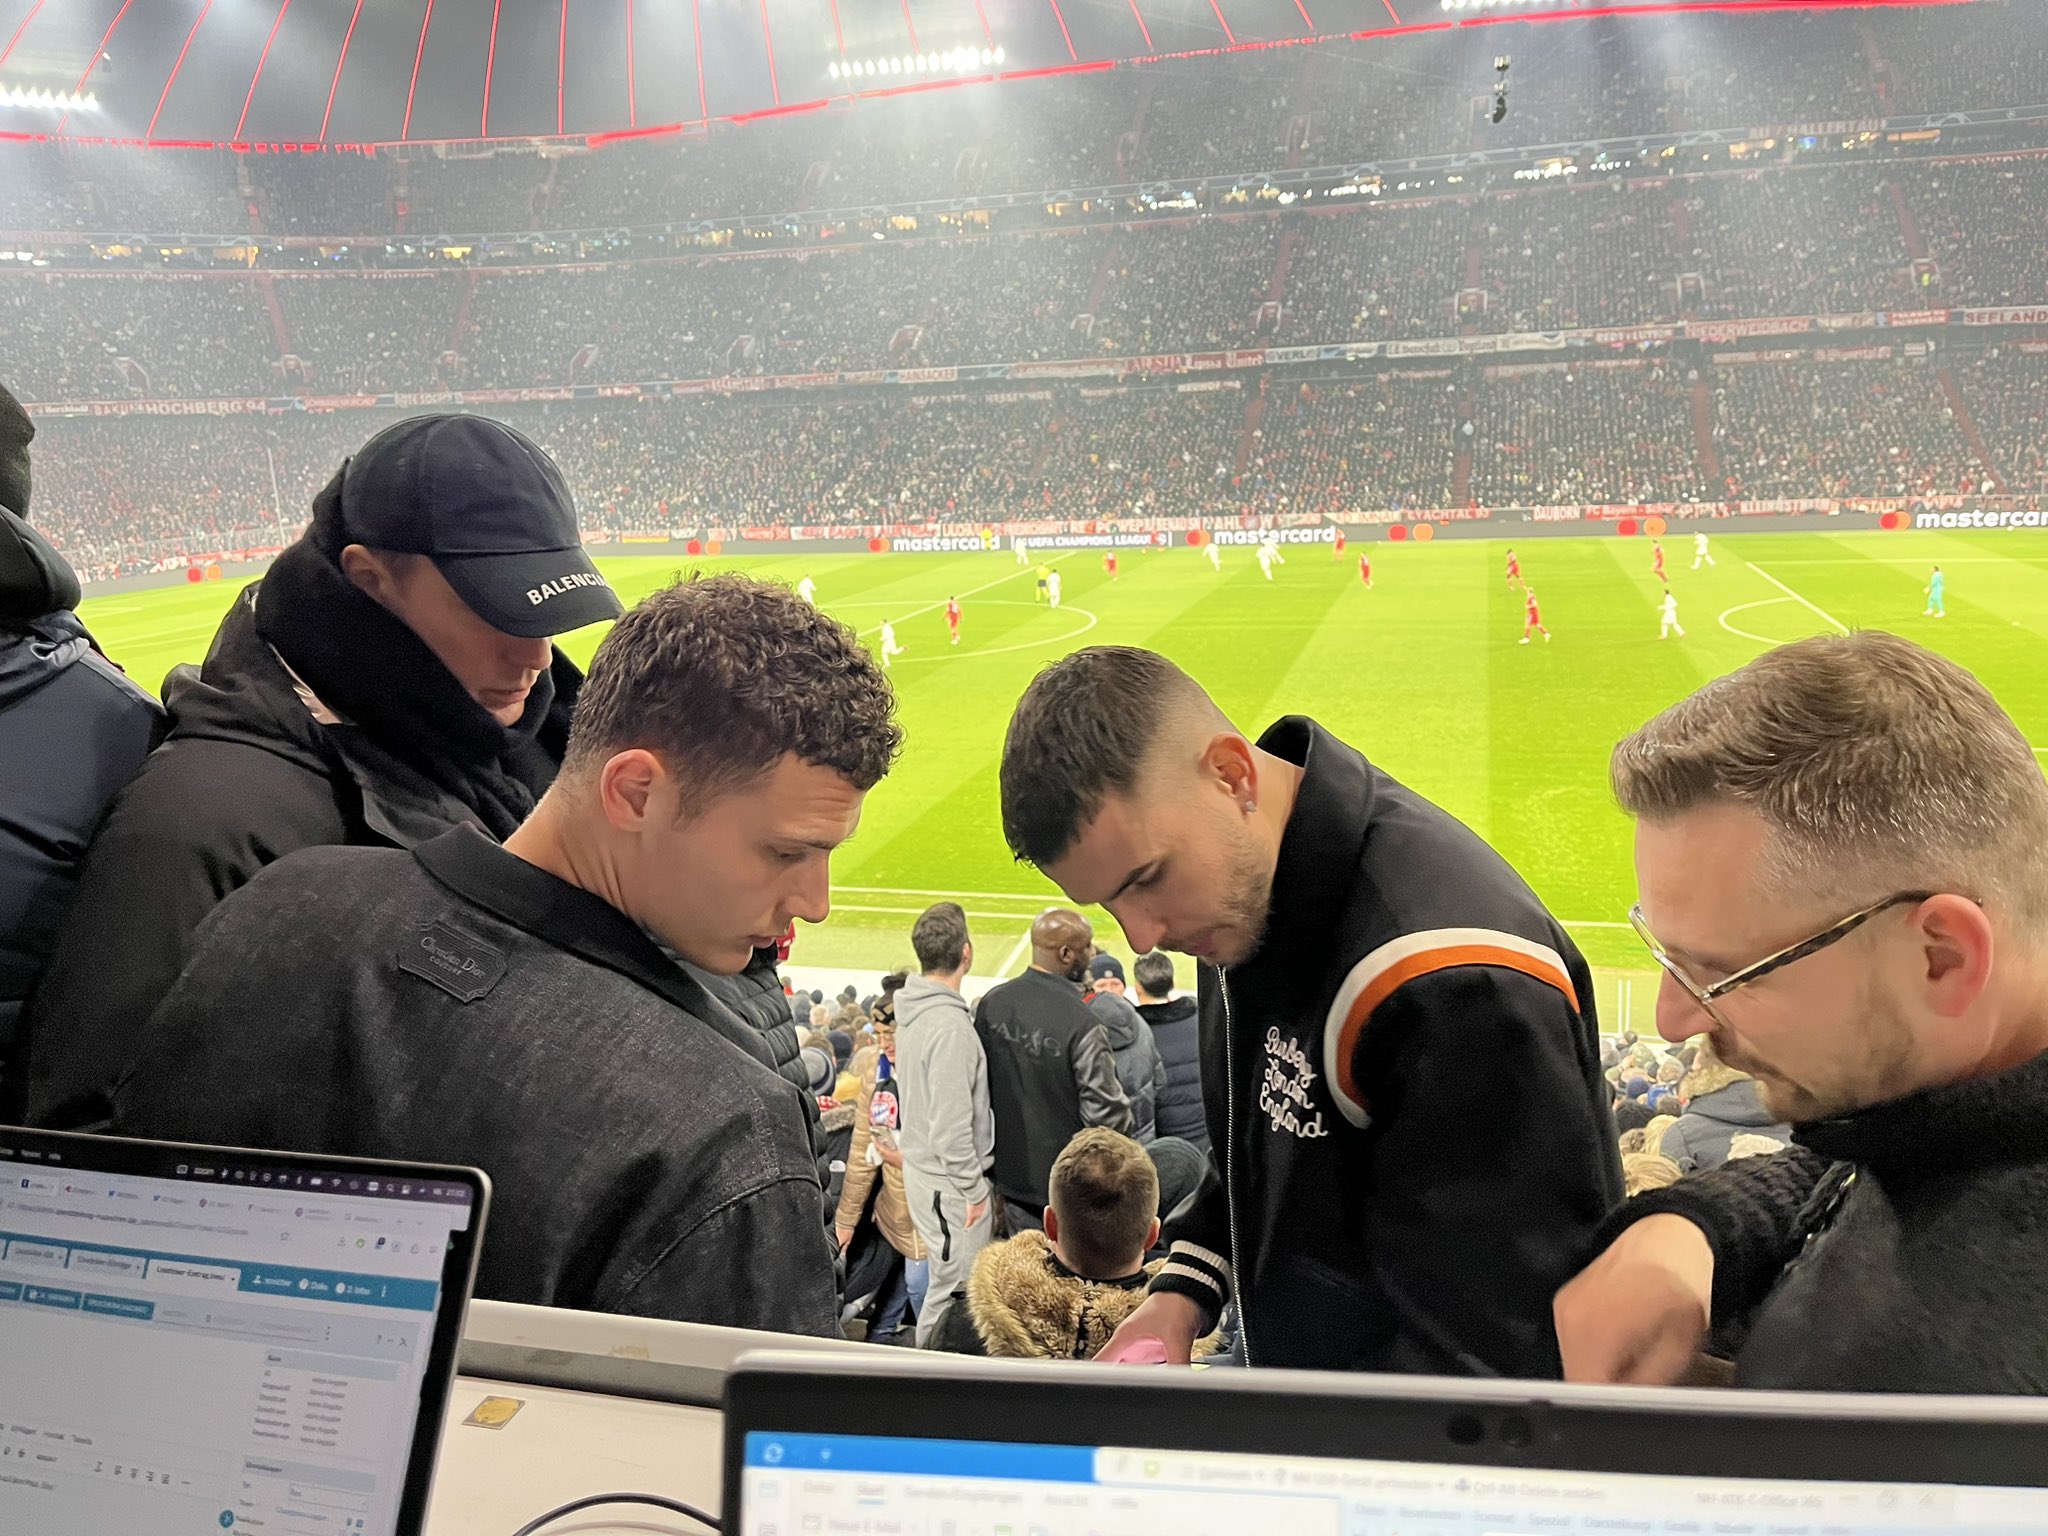 Bayern & Germany on Twitter: "Lucas Hernández and Pavard with Neuer watching the game [📸 @_kochmaximilian] https://t.co/DJ4c5dEIXh" / Twitter